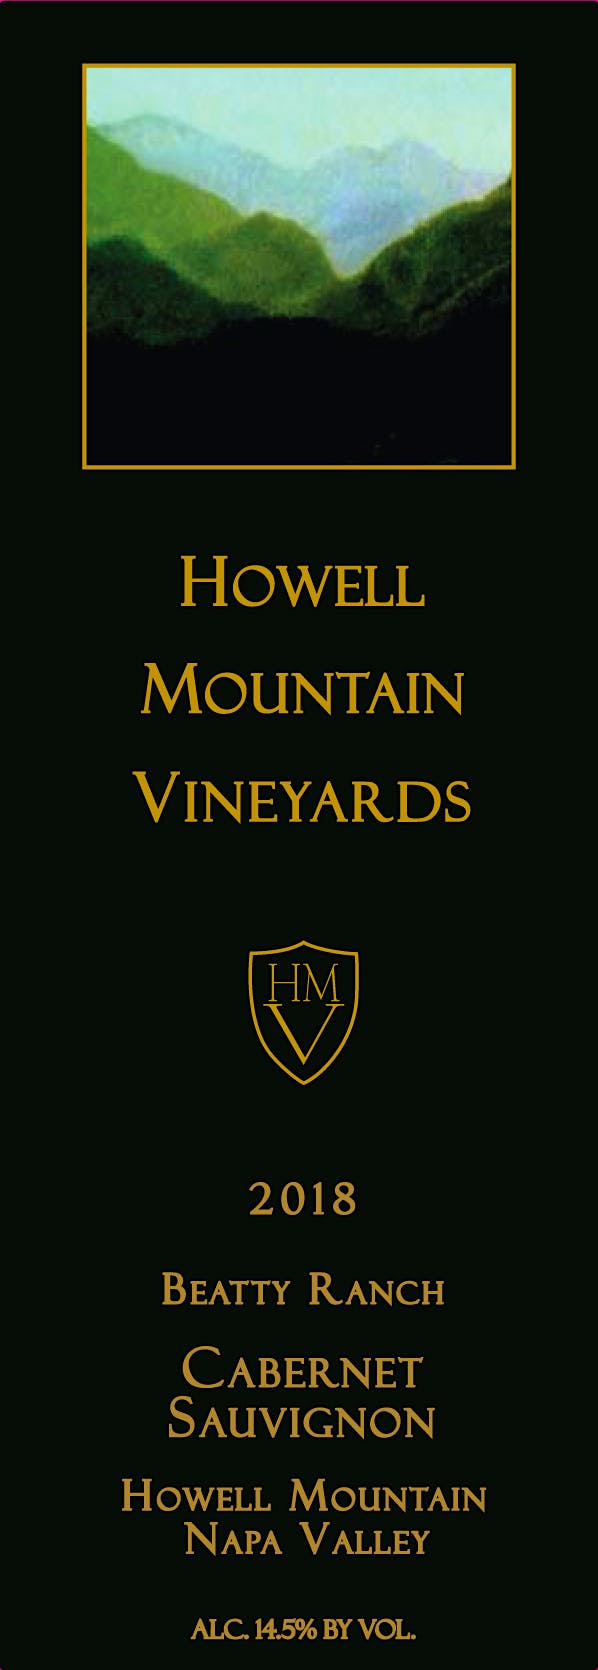 Label for Howell Mountain Vineyards